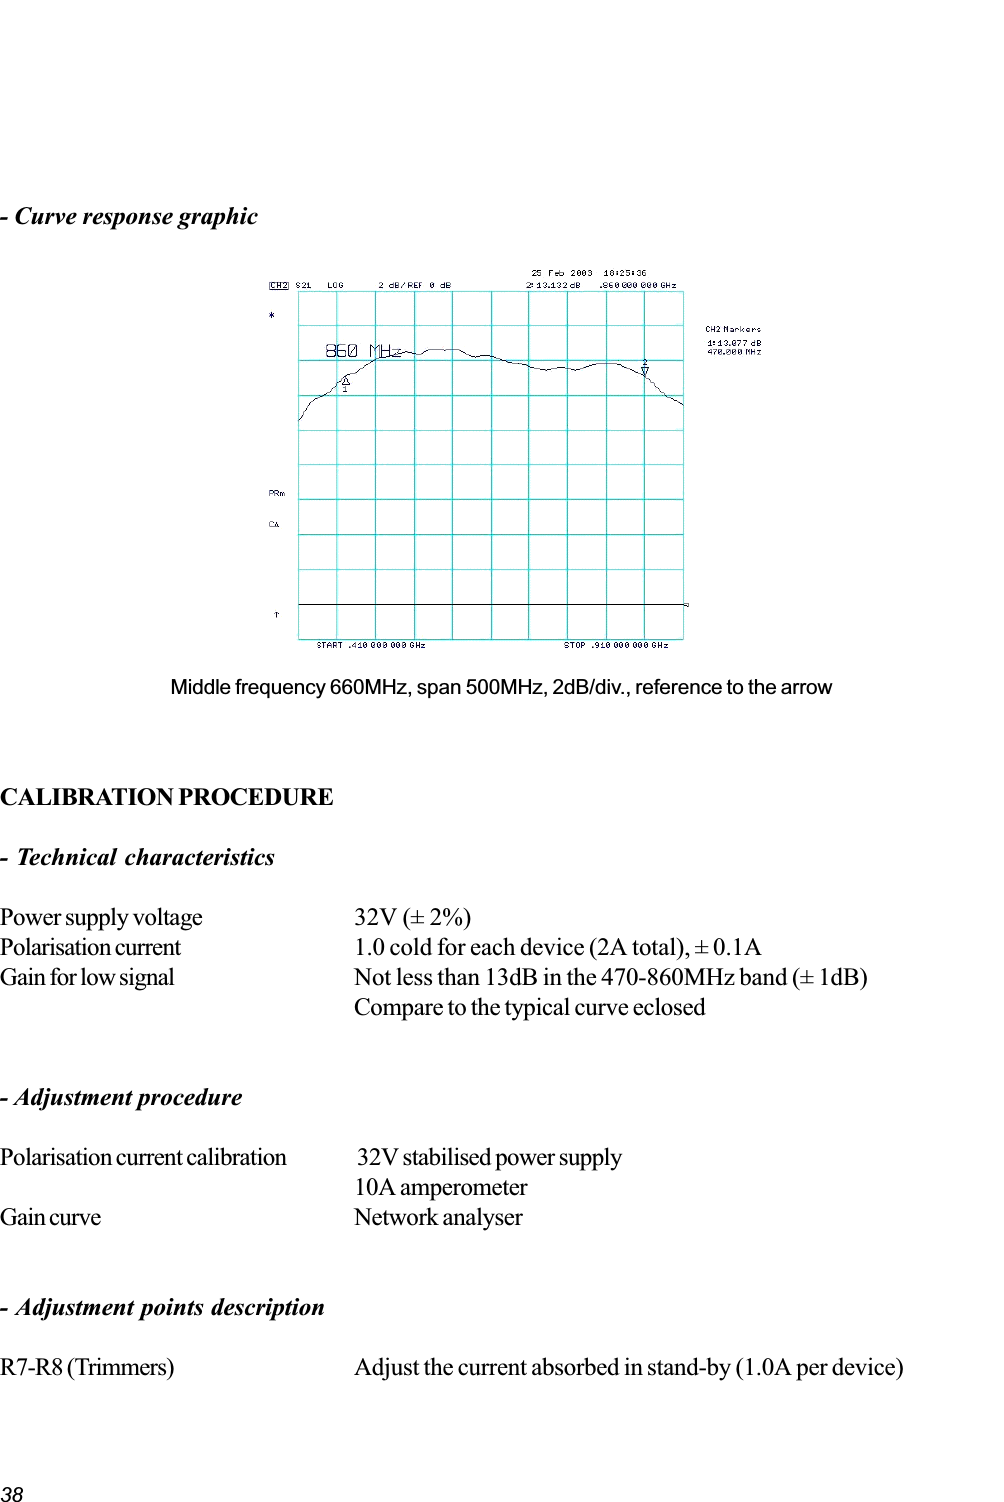 38CALIBRATION PROCEDURE- Technical characteristicsPower supply voltage 32V (± 2%)Polarisation current 1.0 cold for each device (2A total), ± 0.1AGain for low signal Not less than 13dB in the 470-860MHz band (± 1dB)Compare to the typical curve eclosed- Adjustment procedurePolarisation current calibration 32V stabilised power supply10A amperometerGain curve Network analyser- Adjustment points descriptionR7-R8 (Trimmers) Adjust the current absorbed in stand-by (1.0A per device)Middle frequency 660MHz, span 500MHz, 2dB/div., reference to the arrow- Curve response graphic